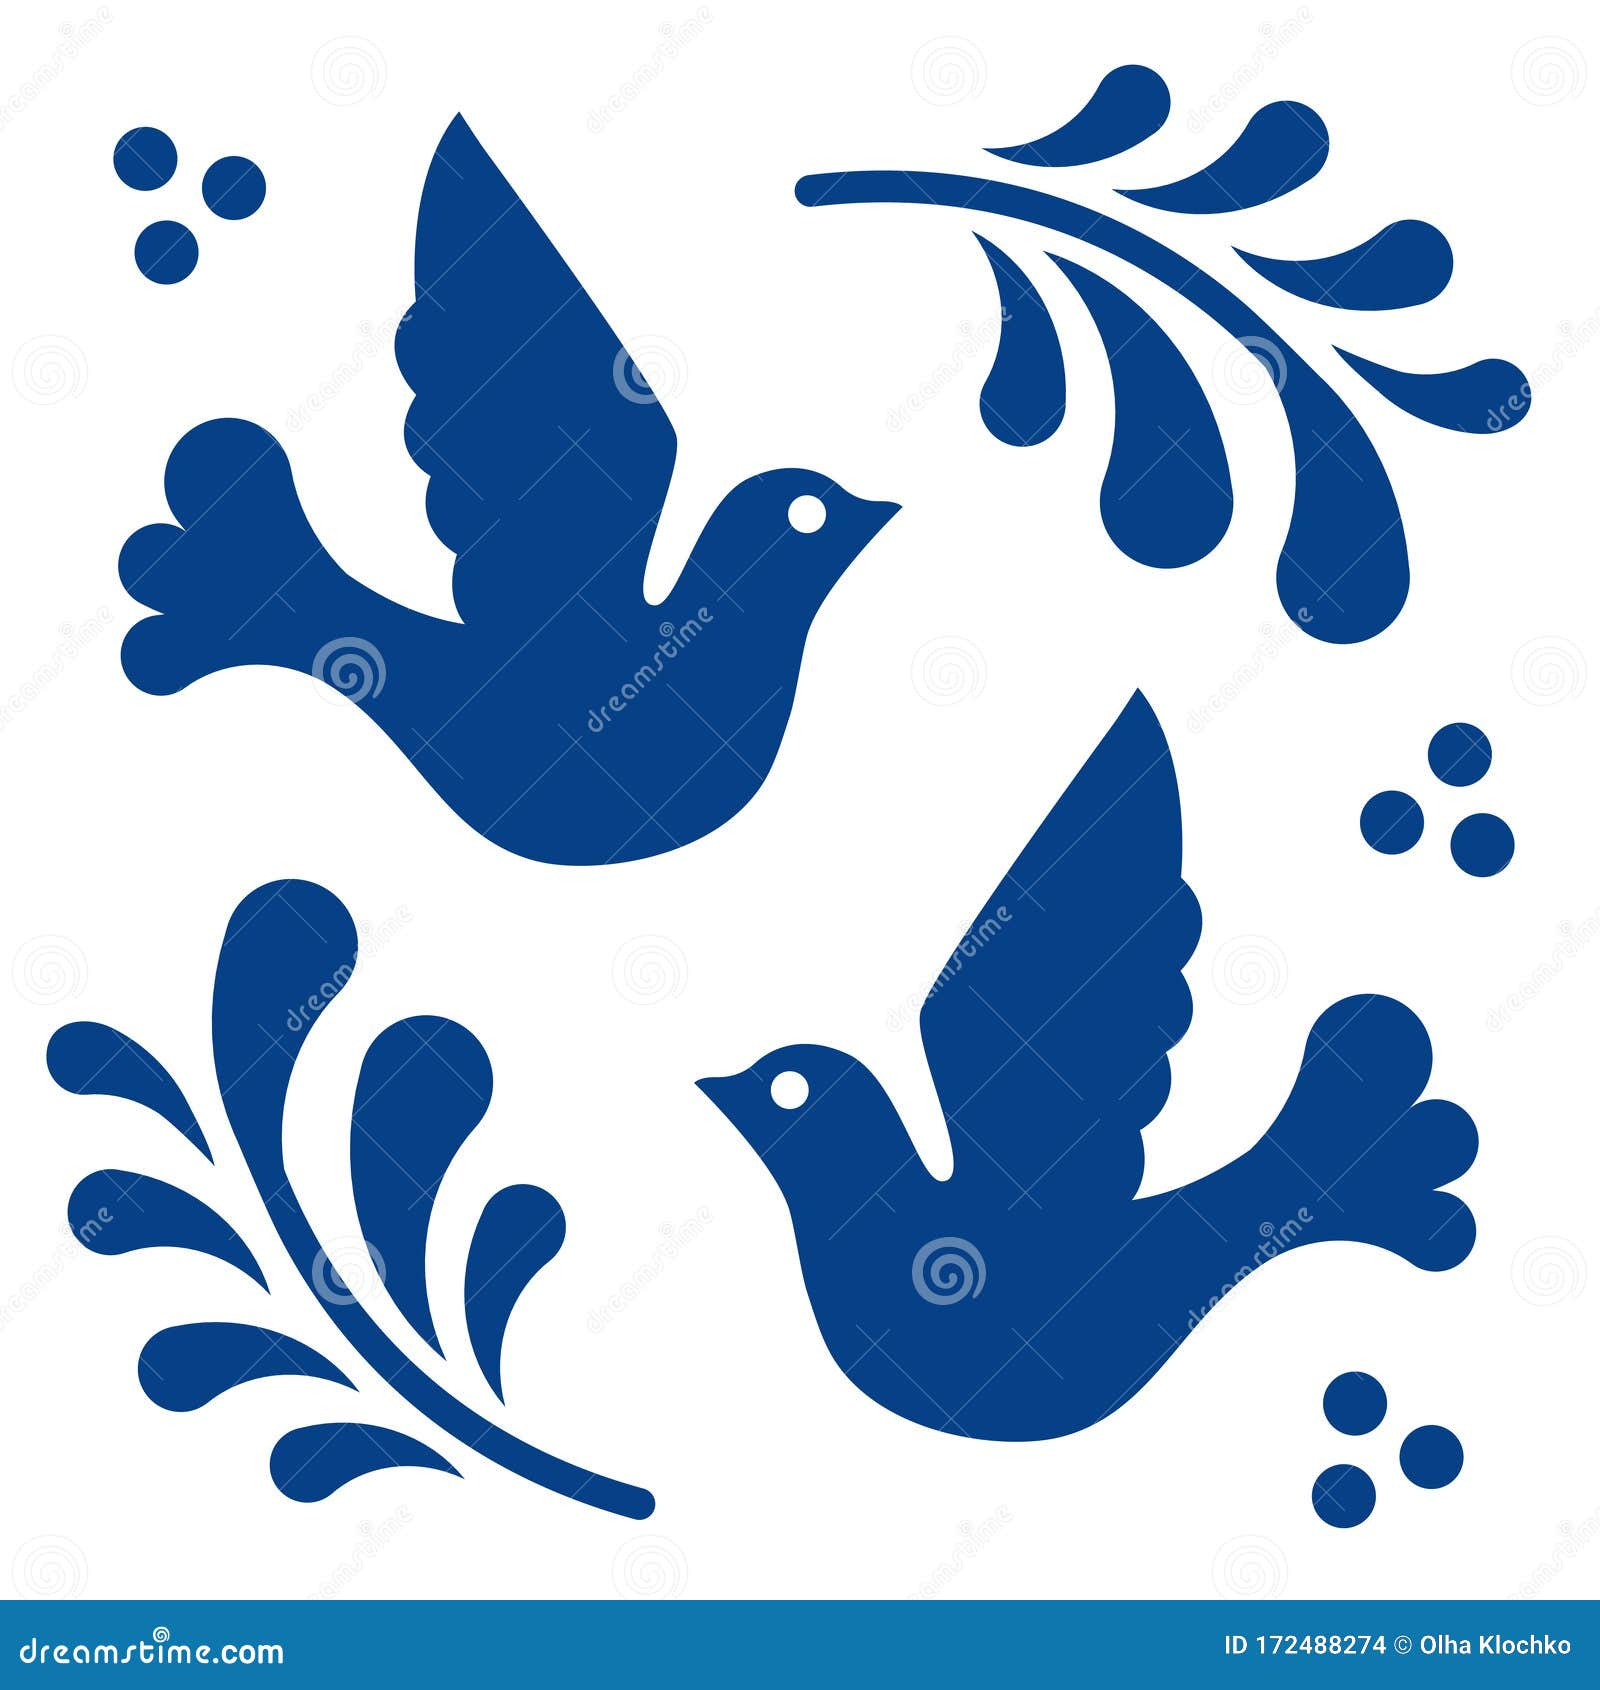 mexican talavera tile pattern with birds. ornament in traditional style from puebla in classic blue and white. floral